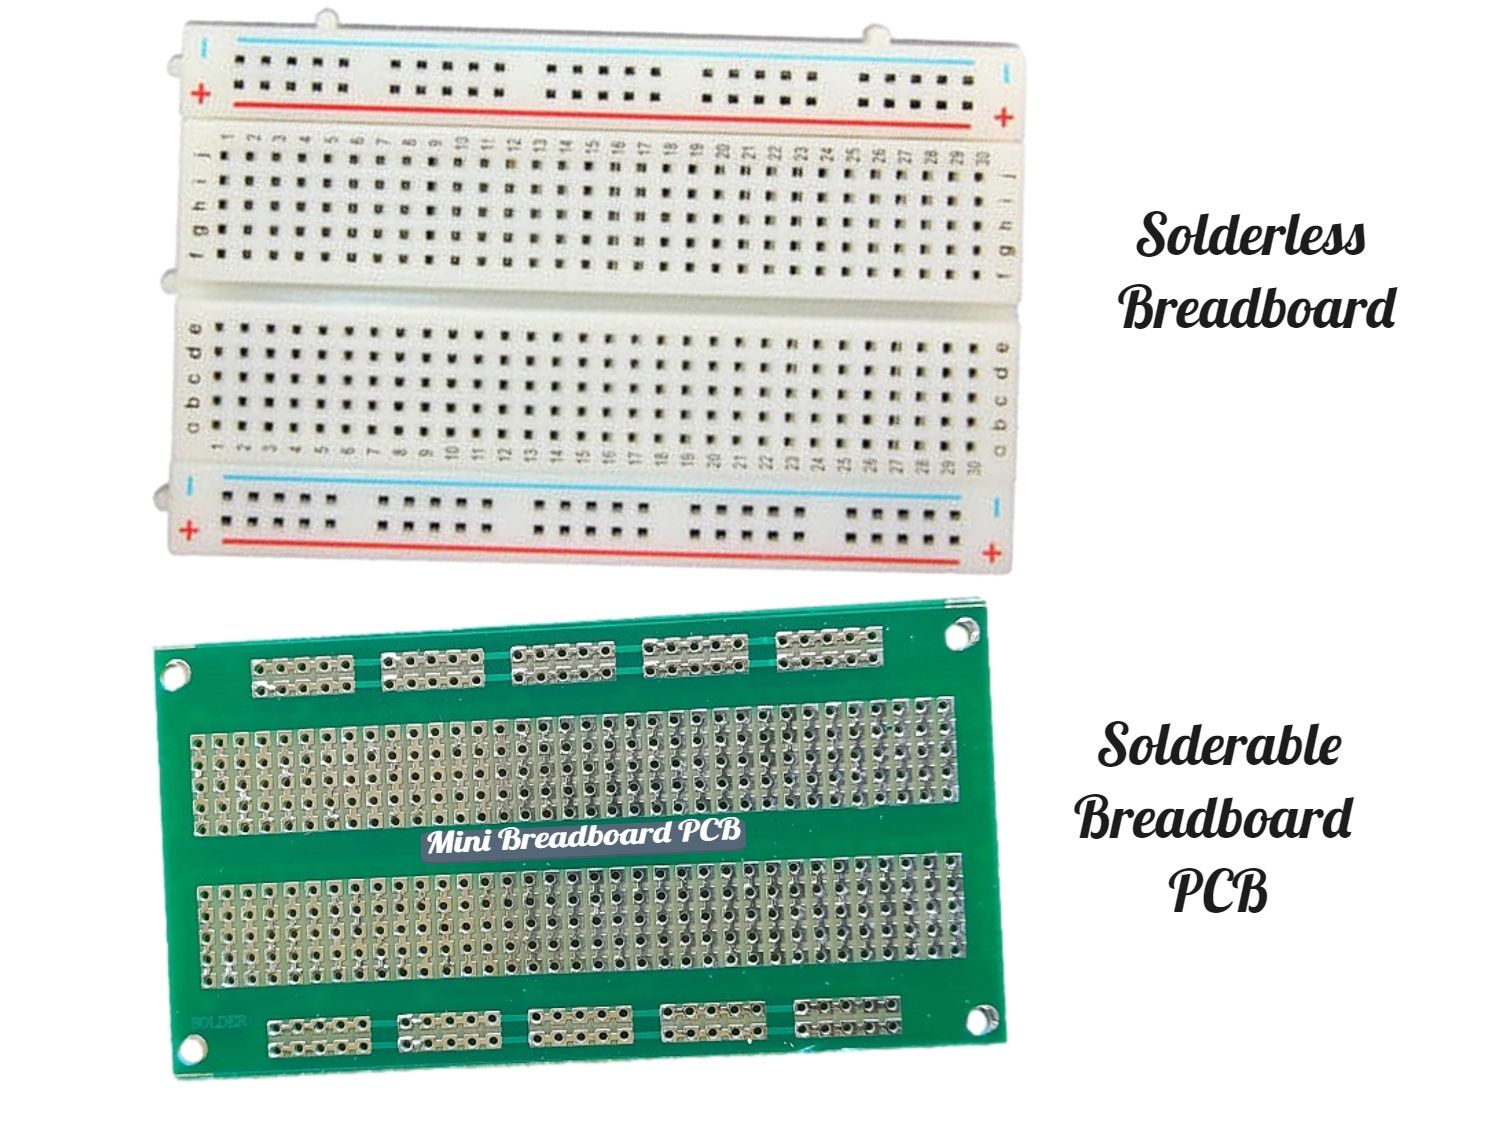 Solderless Breadboard And Solder able Breadboard PCB - One Piece Each